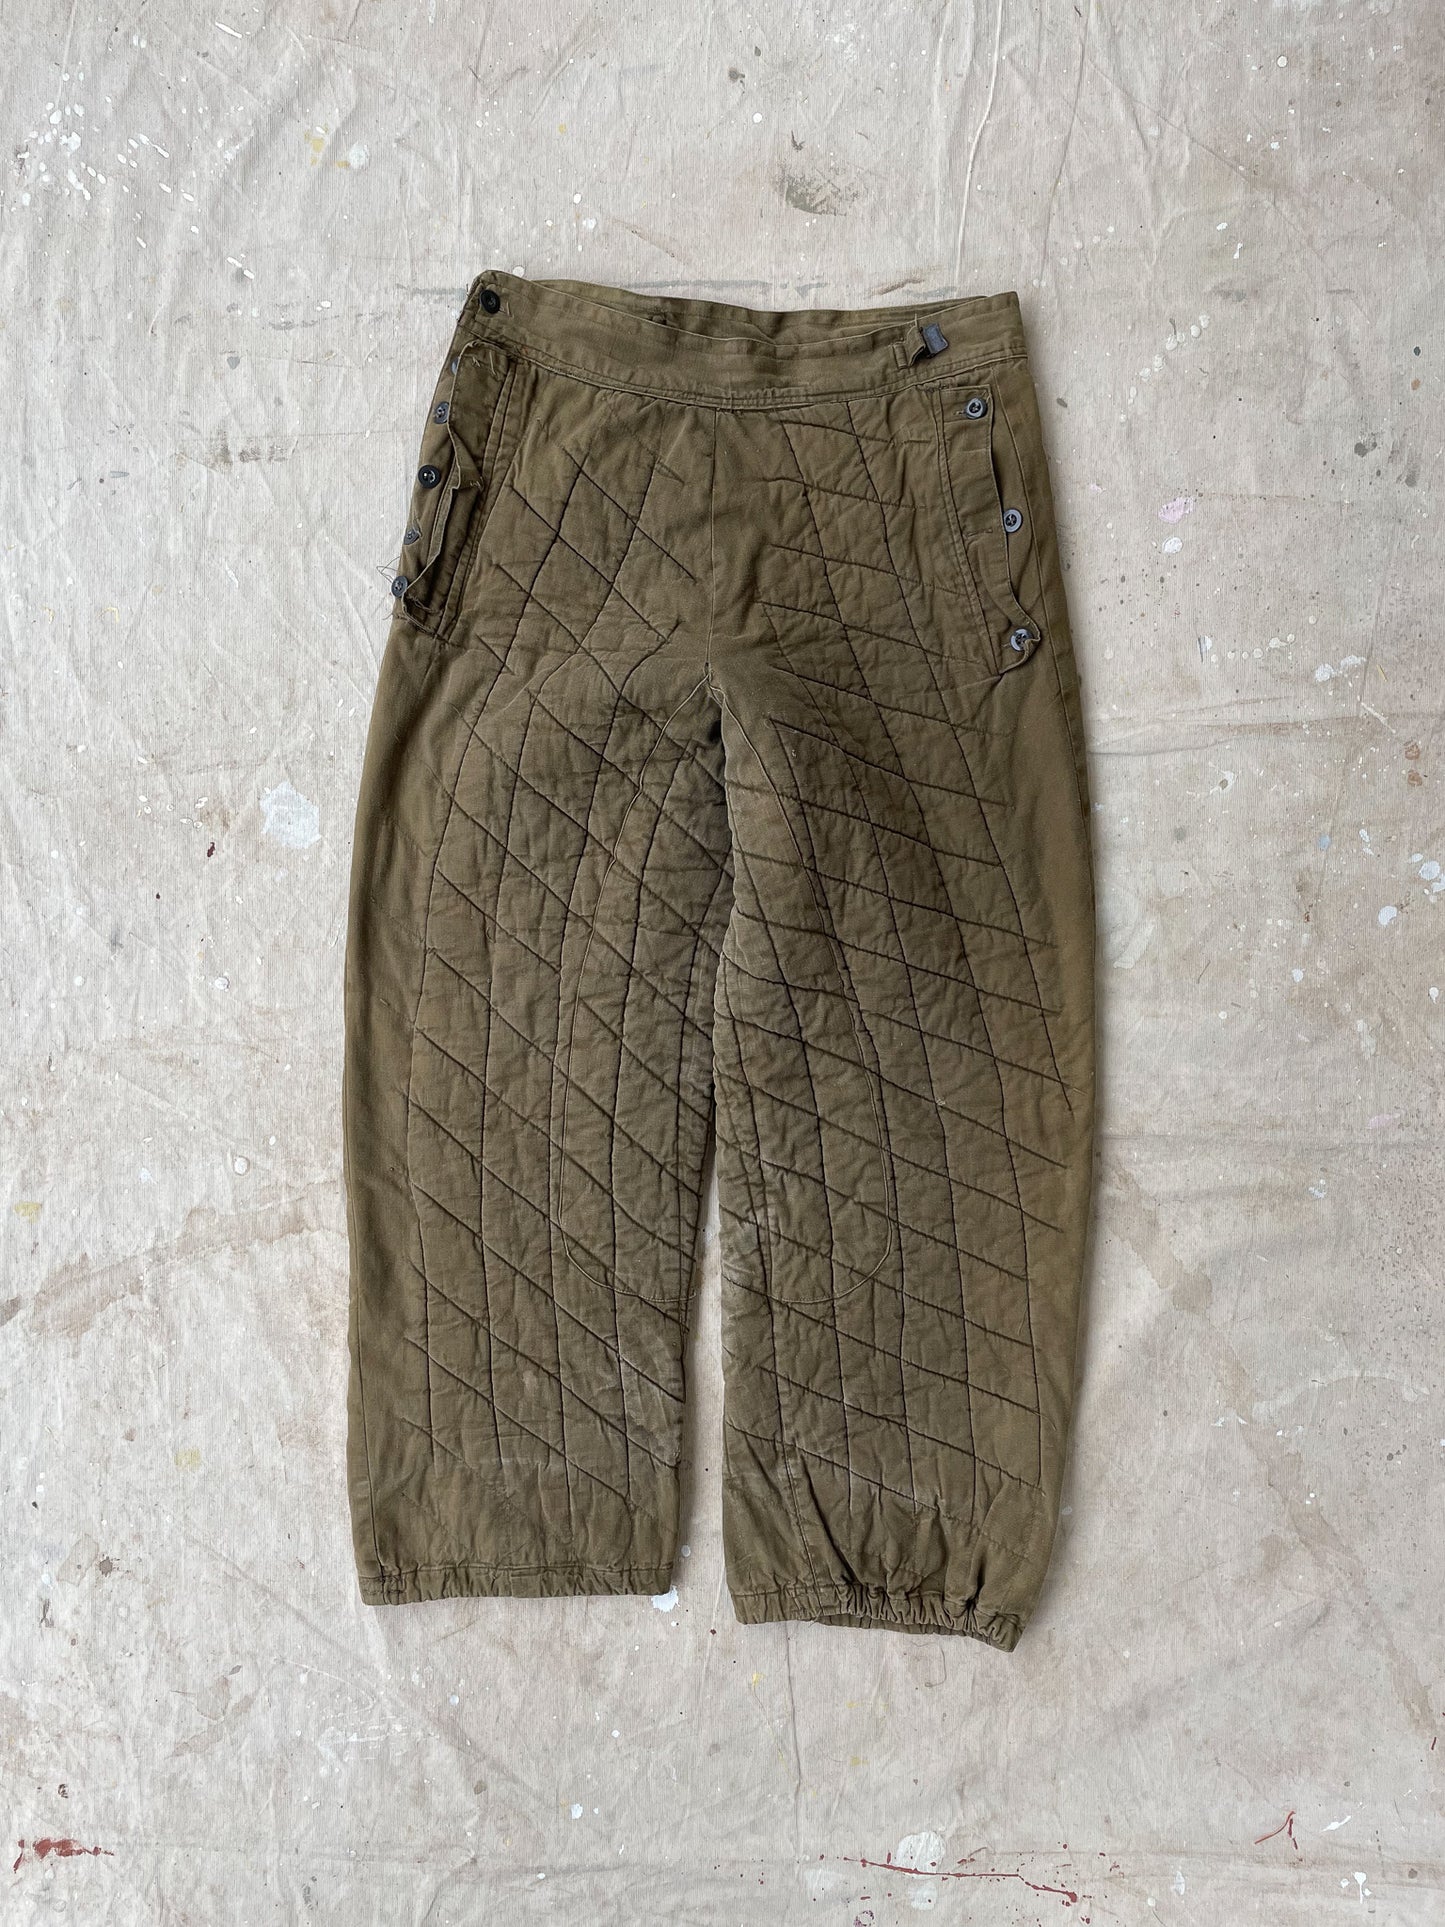 Quilted Insulated Winter Pants—[34x30]